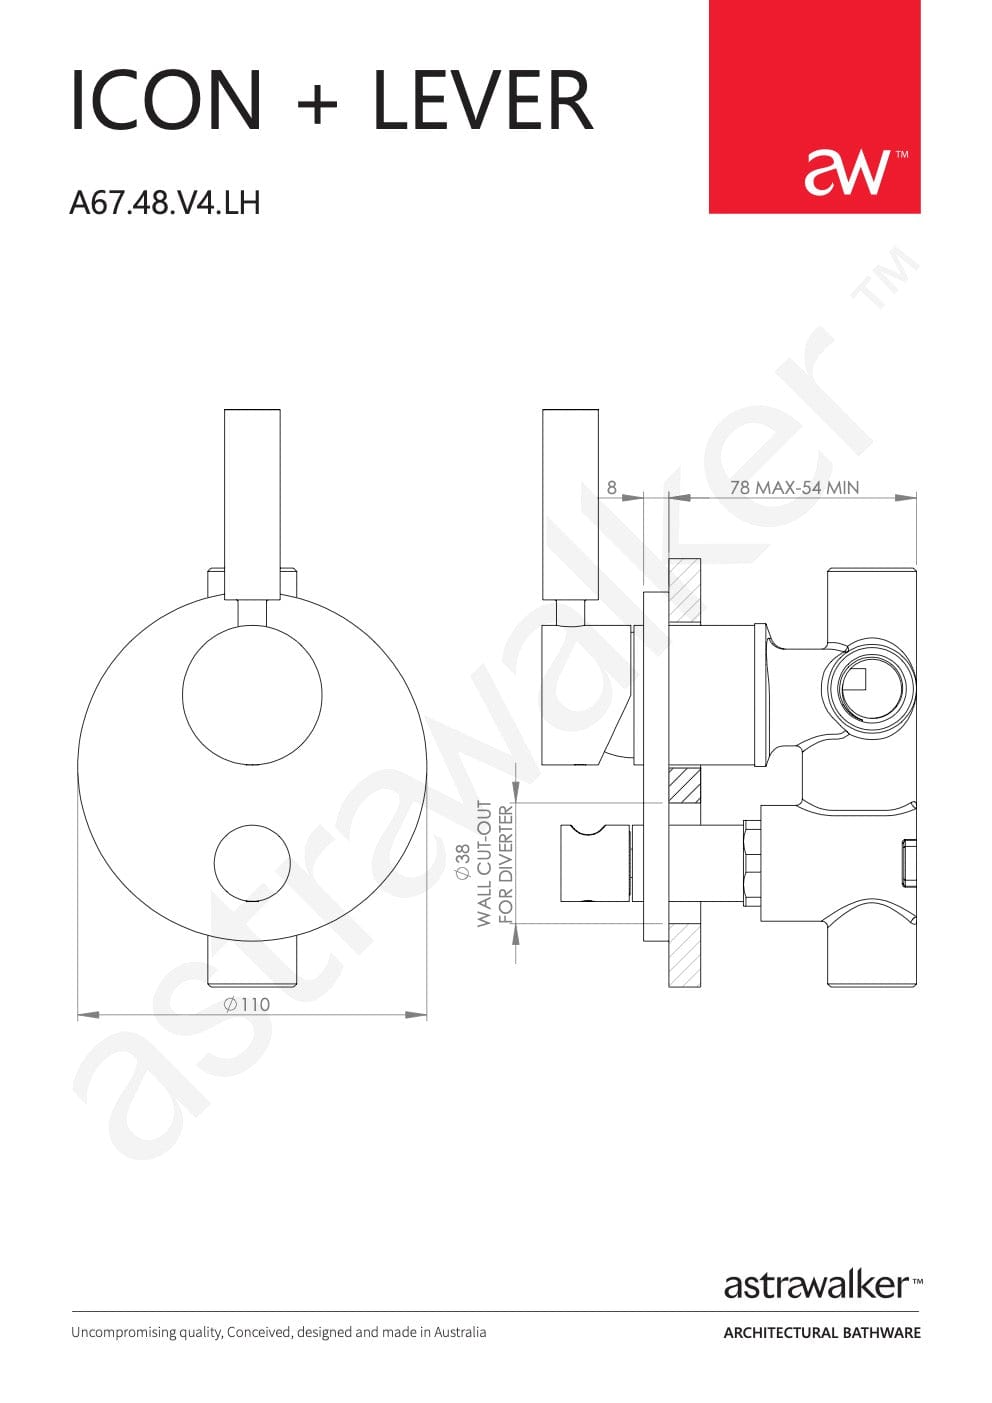 Astra Walker Wall Mixers Astra Walker Icon + Lever Round Diverter Mixer